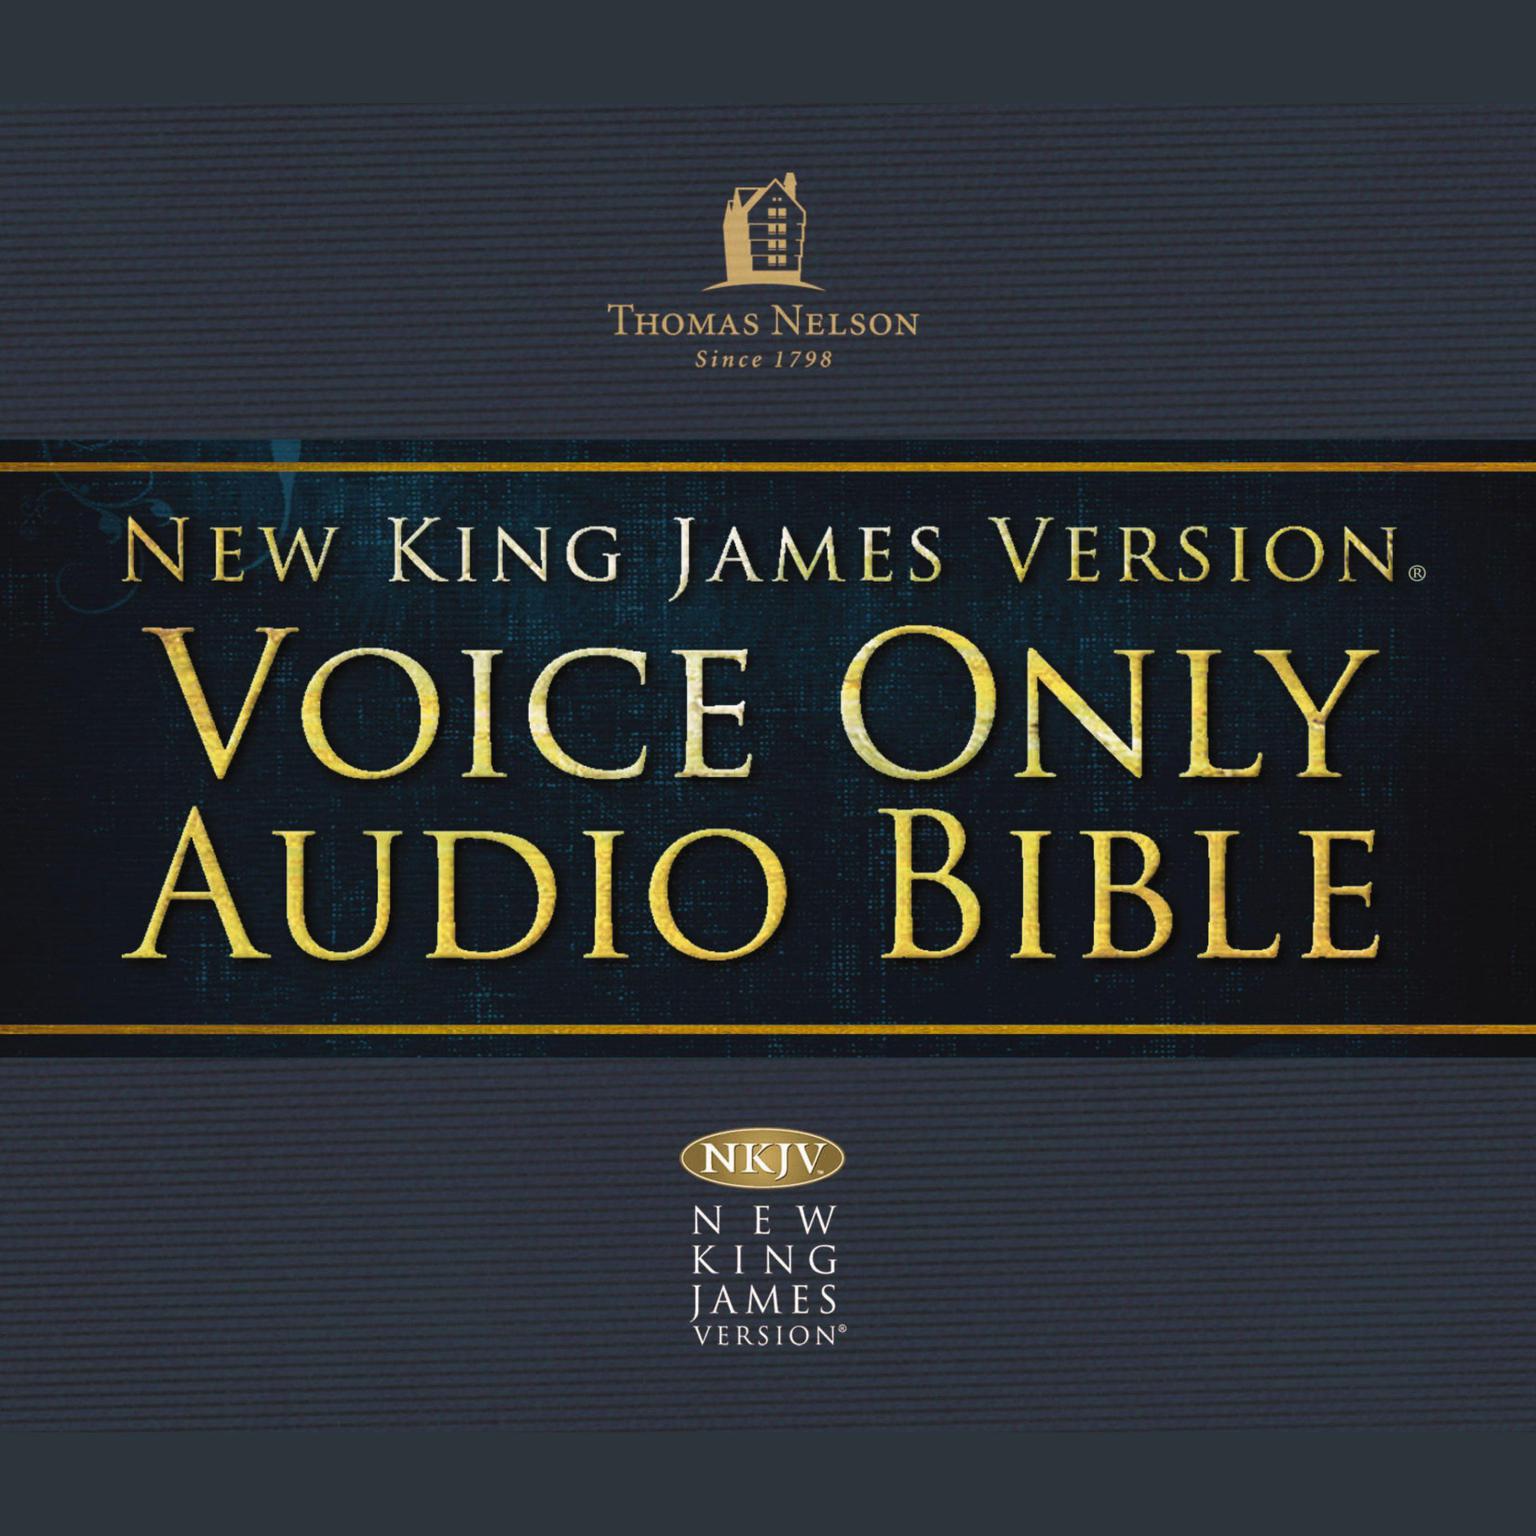 Voice Only Audio Bible - New King James Version, NKJV (Narrated by Bob Souer): (12) 1 Chronicles: Holy Bible, New King James Version Audiobook, by Thomas Nelson